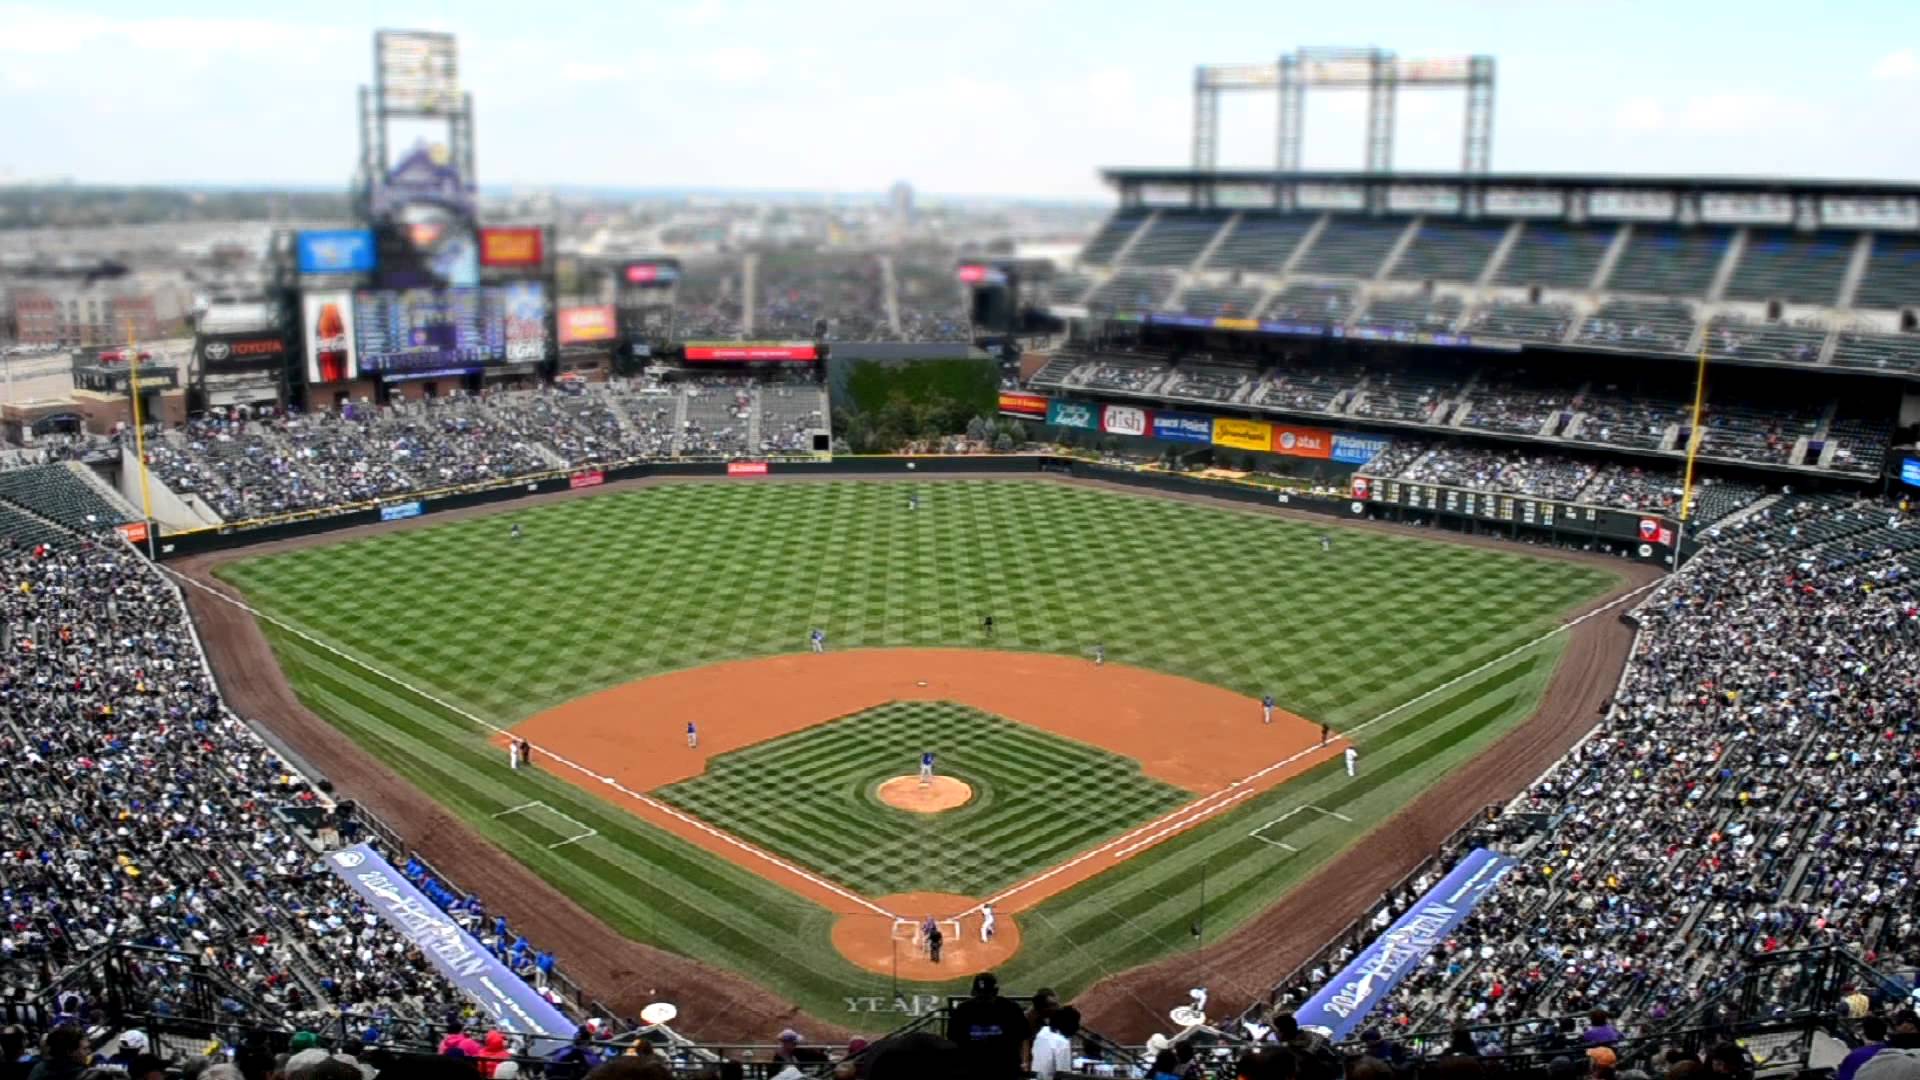 Rockies Opening Day Tickets. Rockies Tickets Opening Day 2019